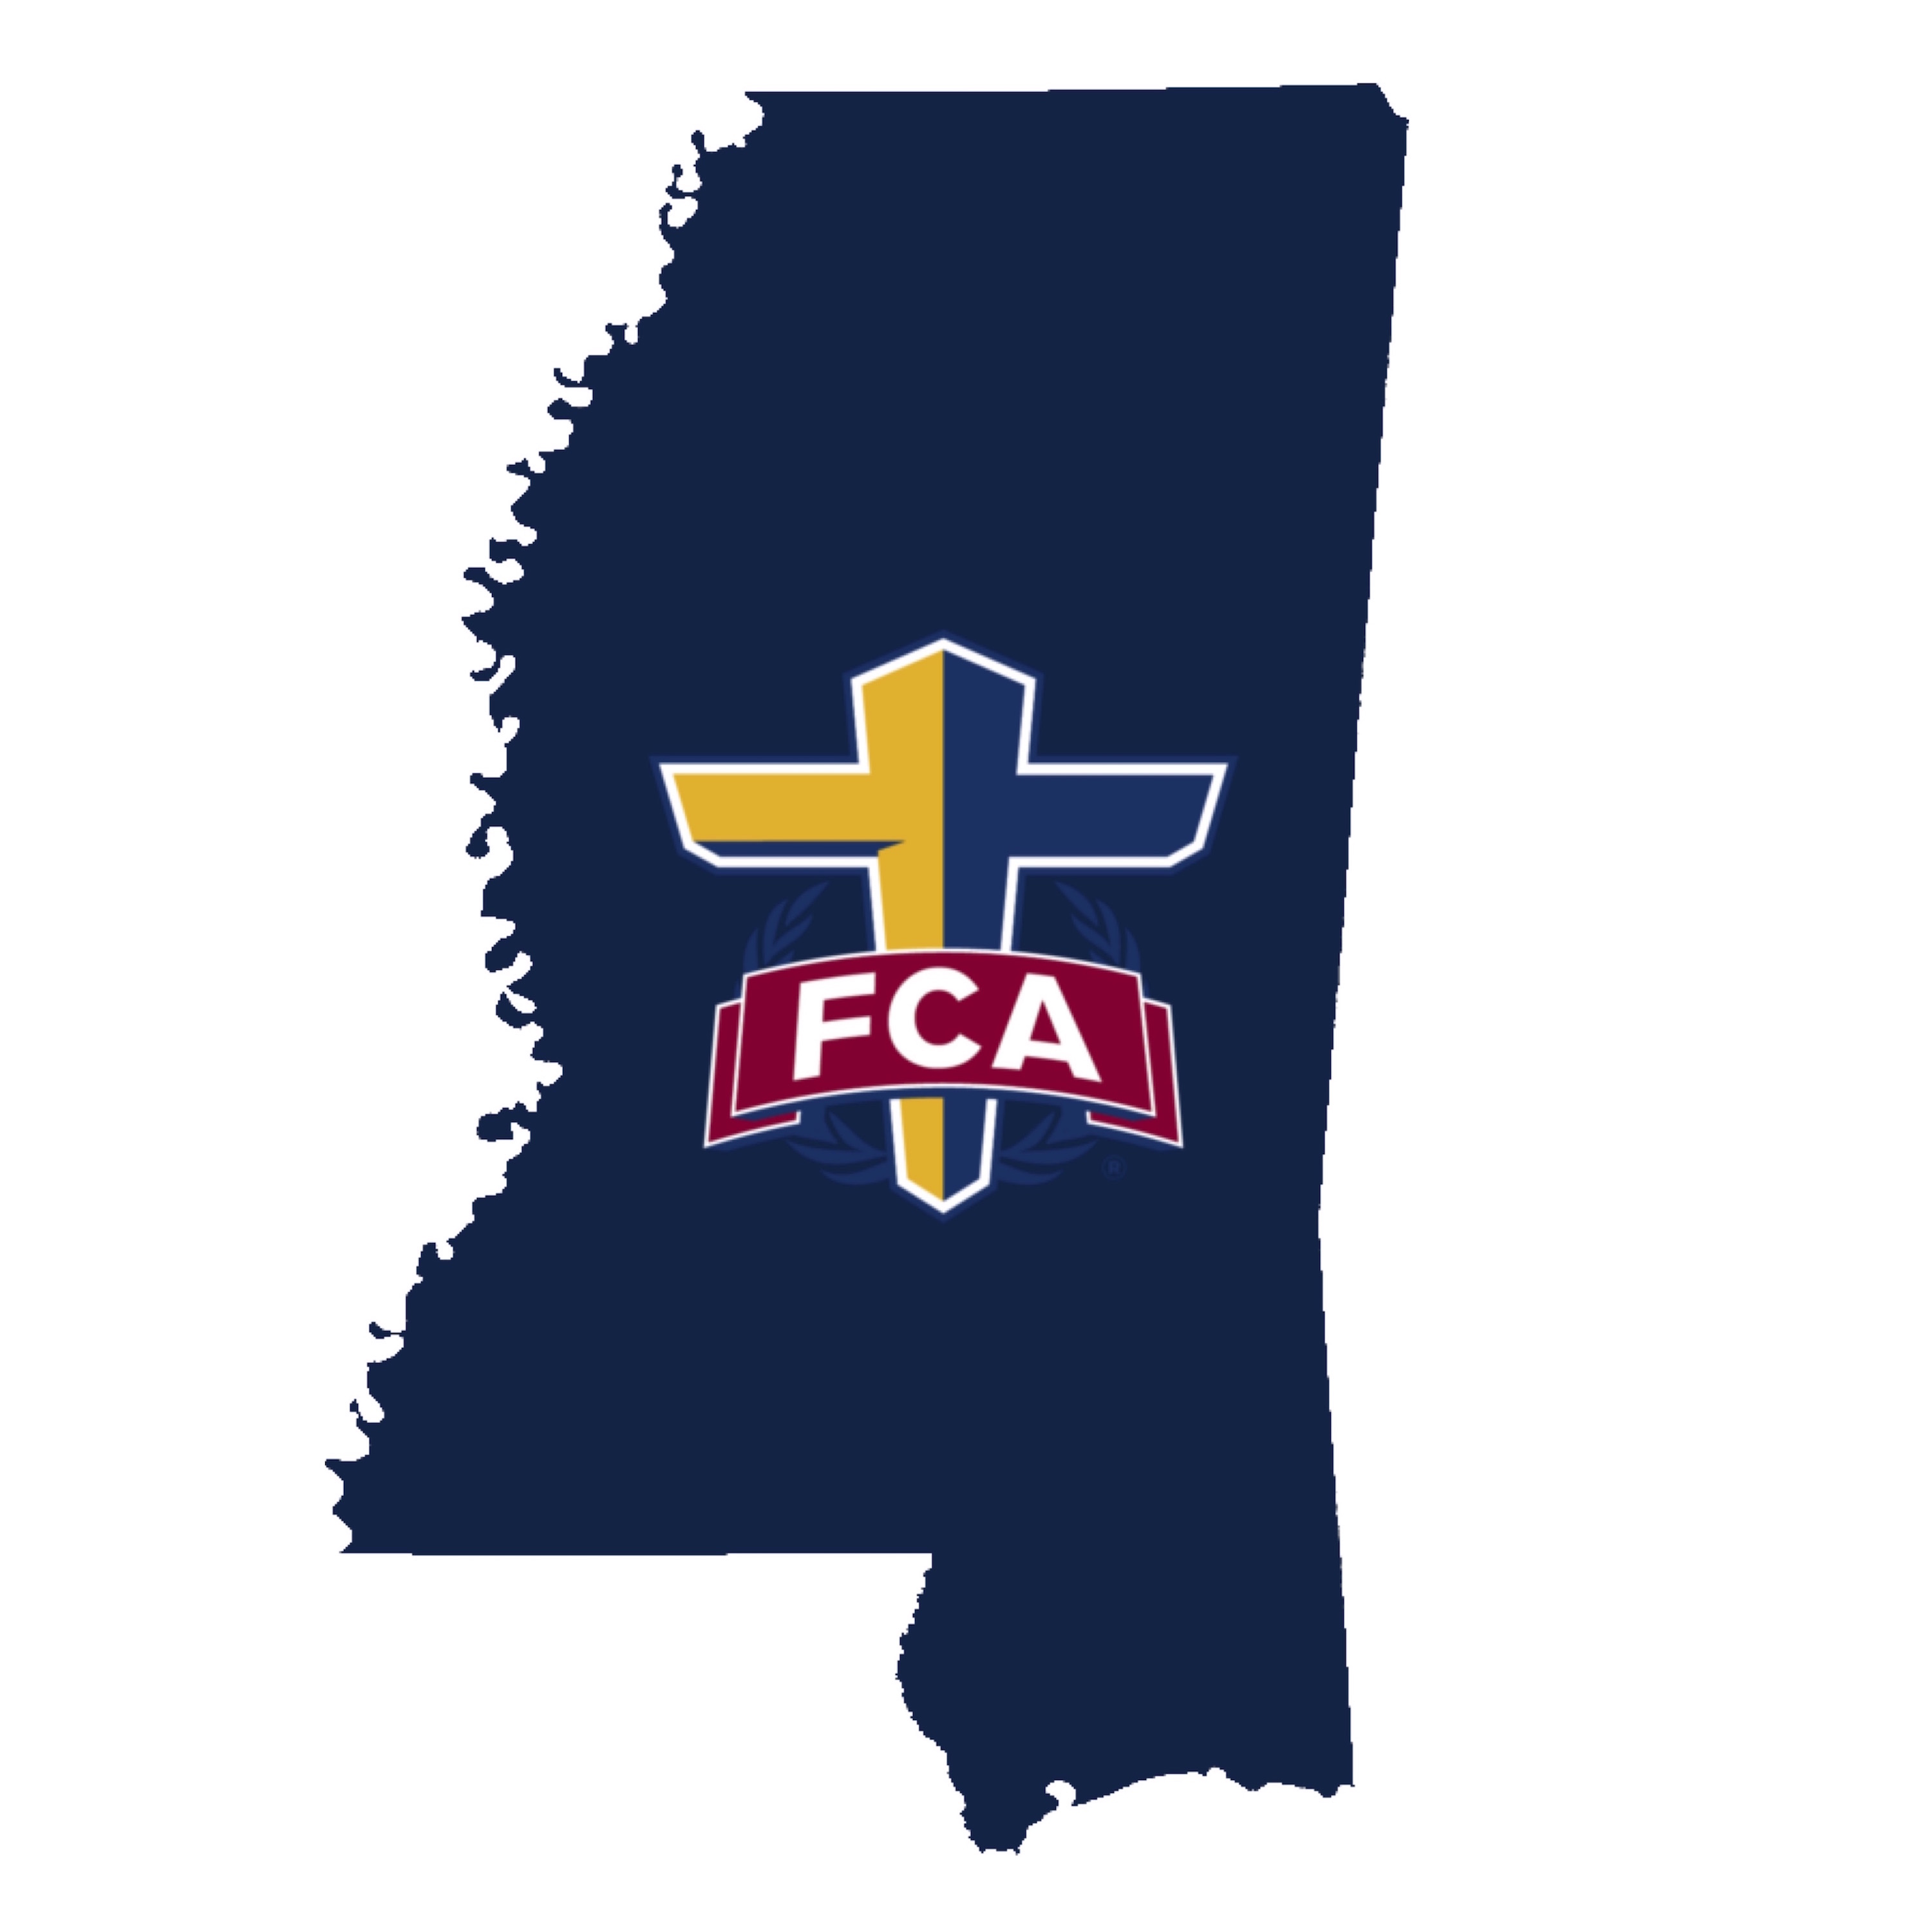 MS FCA - Episode 2 - Special Guest - Bill Curry